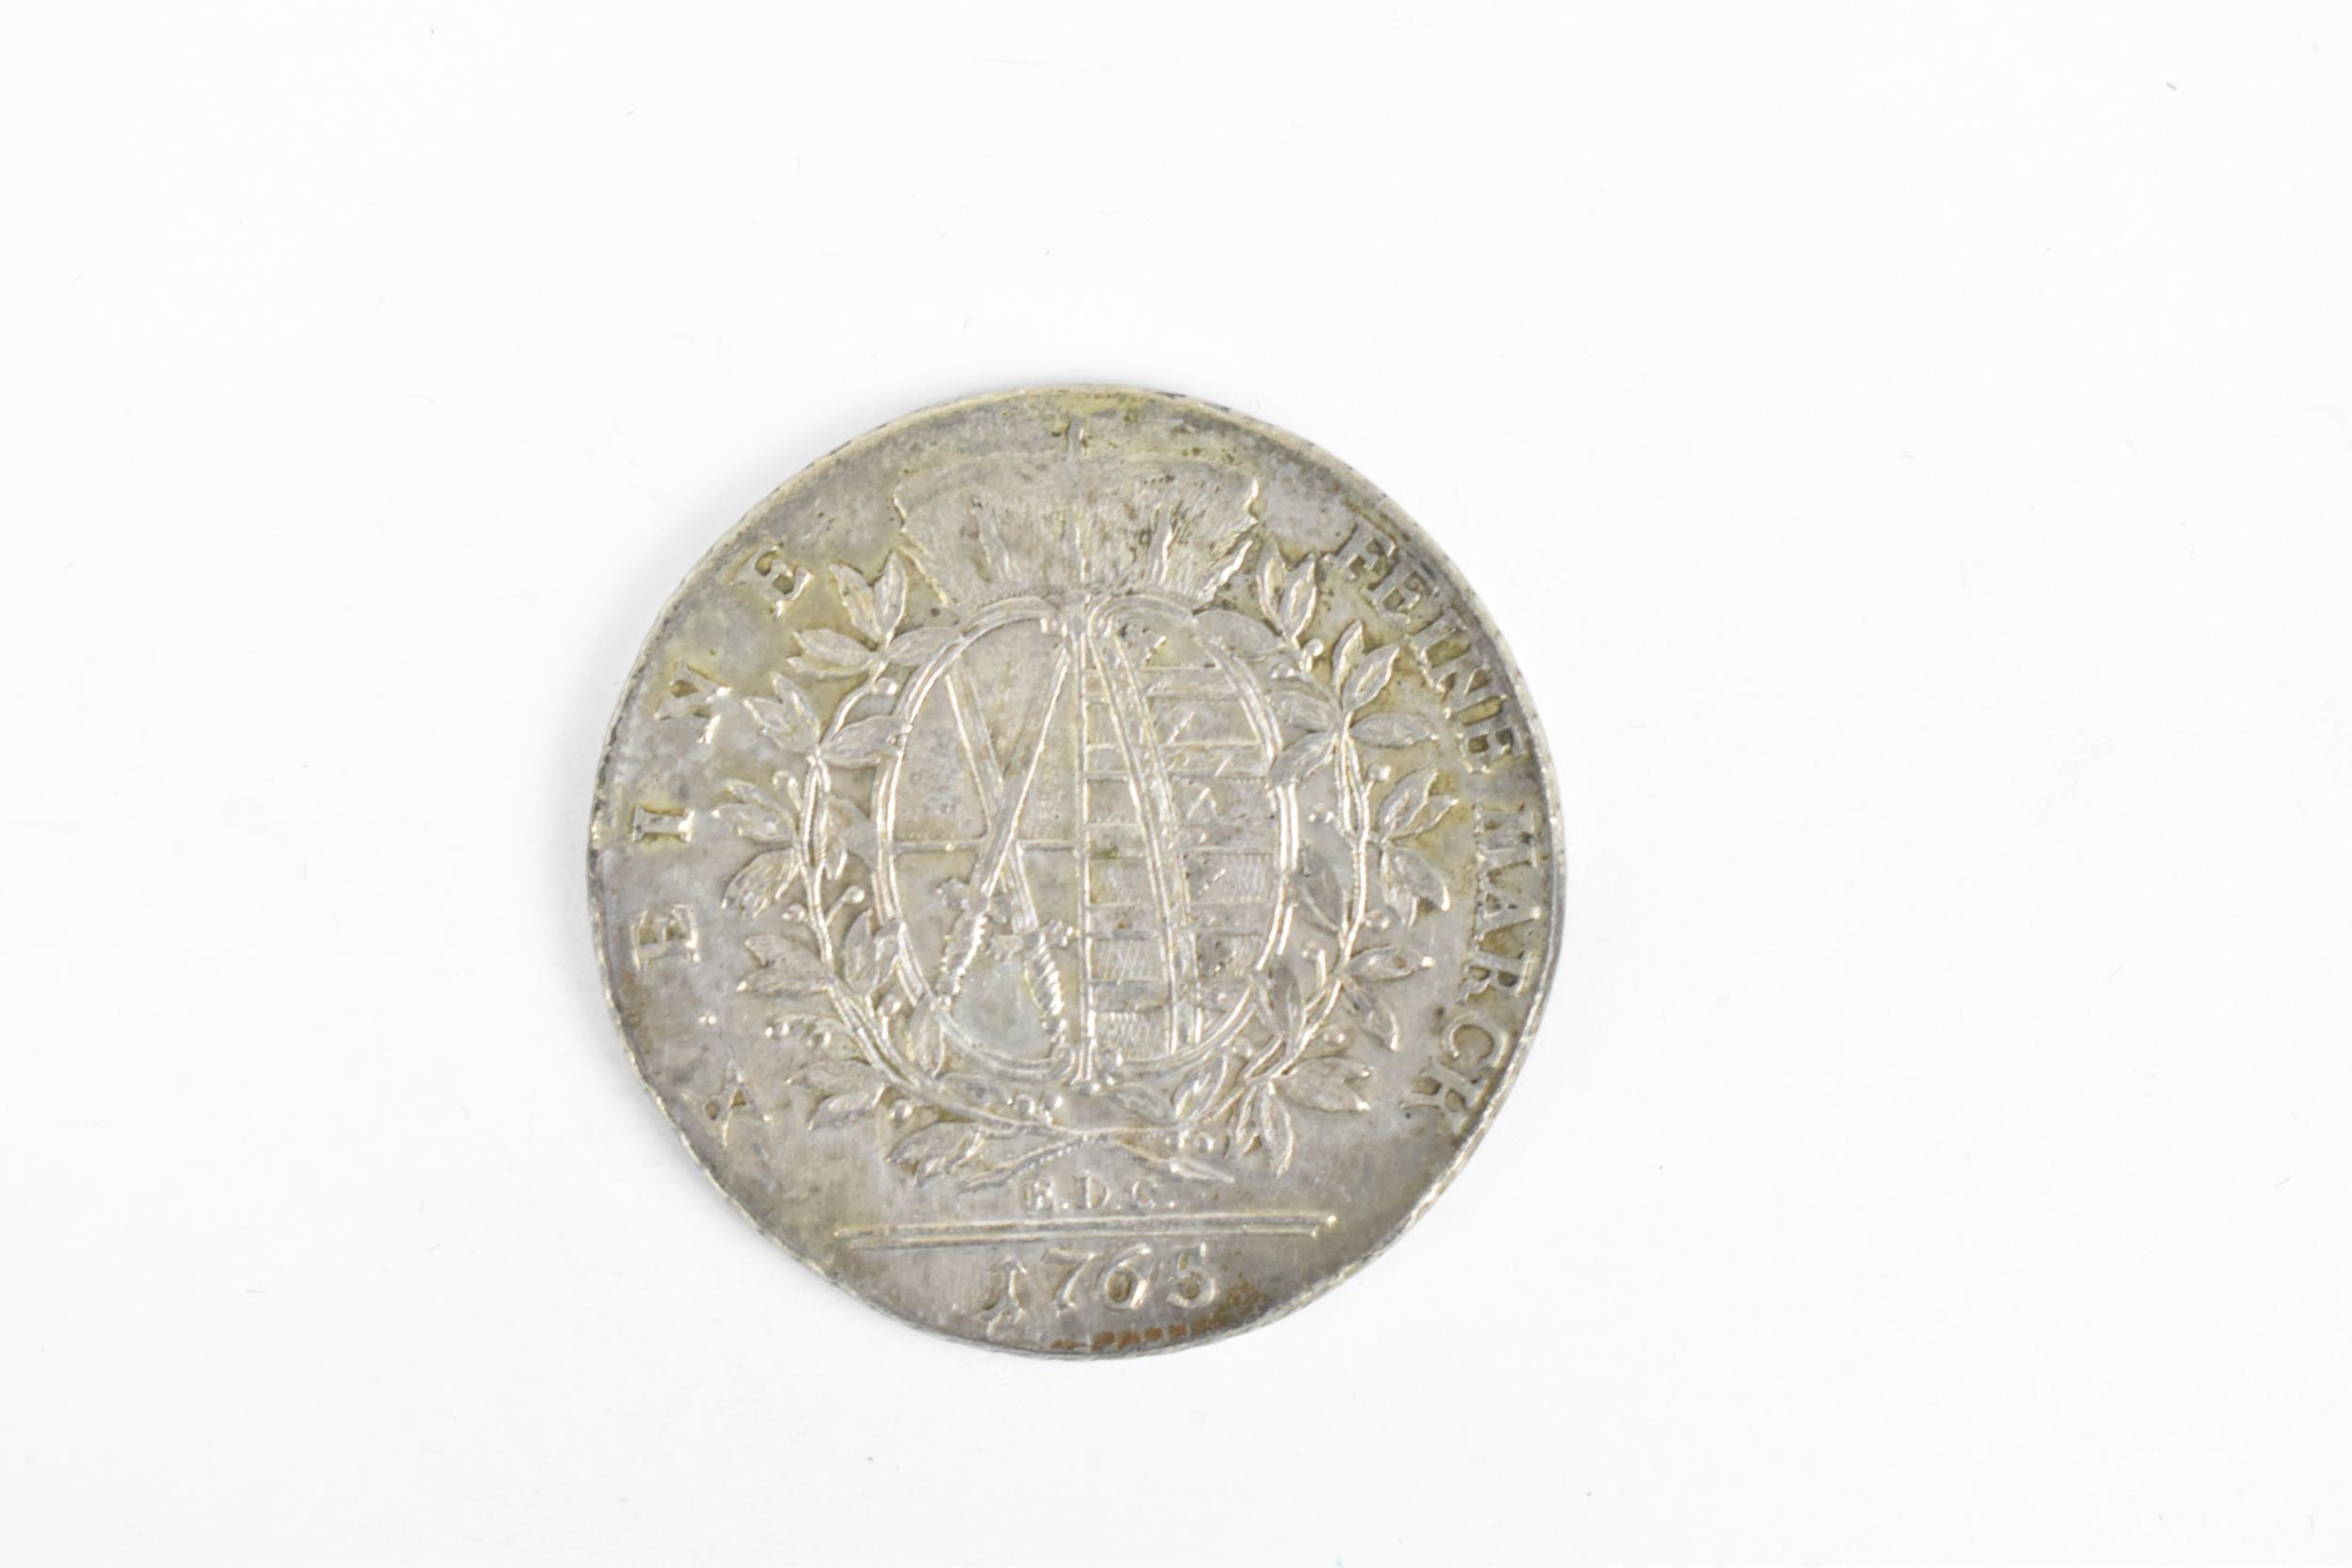 Electorate of Saxony (Holy Roman Empire) - Friedrich August III (1763-1806), Thaler Dresden mint, - Image 2 of 2